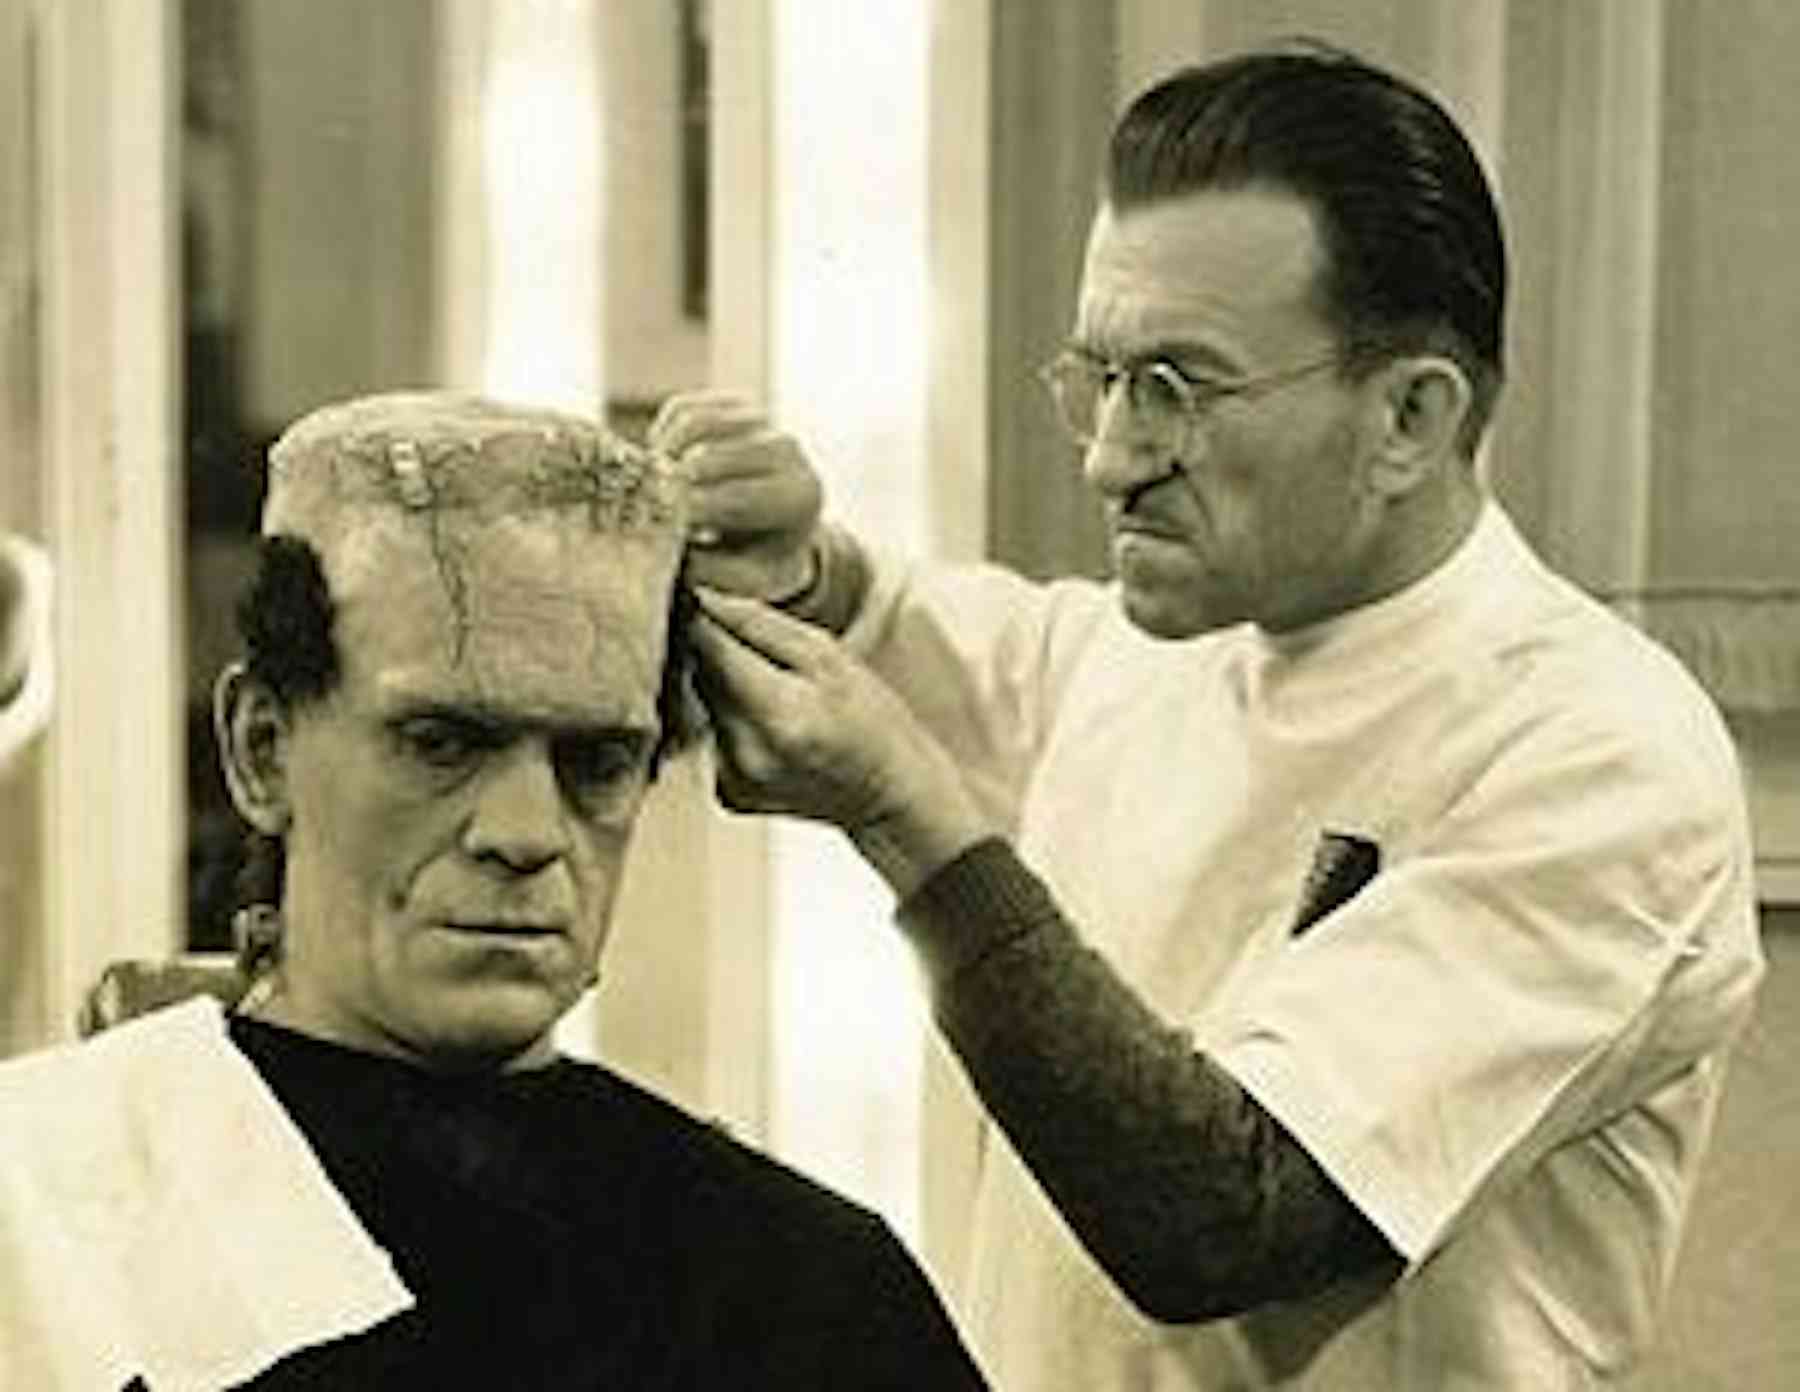 Two Centuries On Frankenstein Is The Perfect Metaphor For The Anthropocene Era